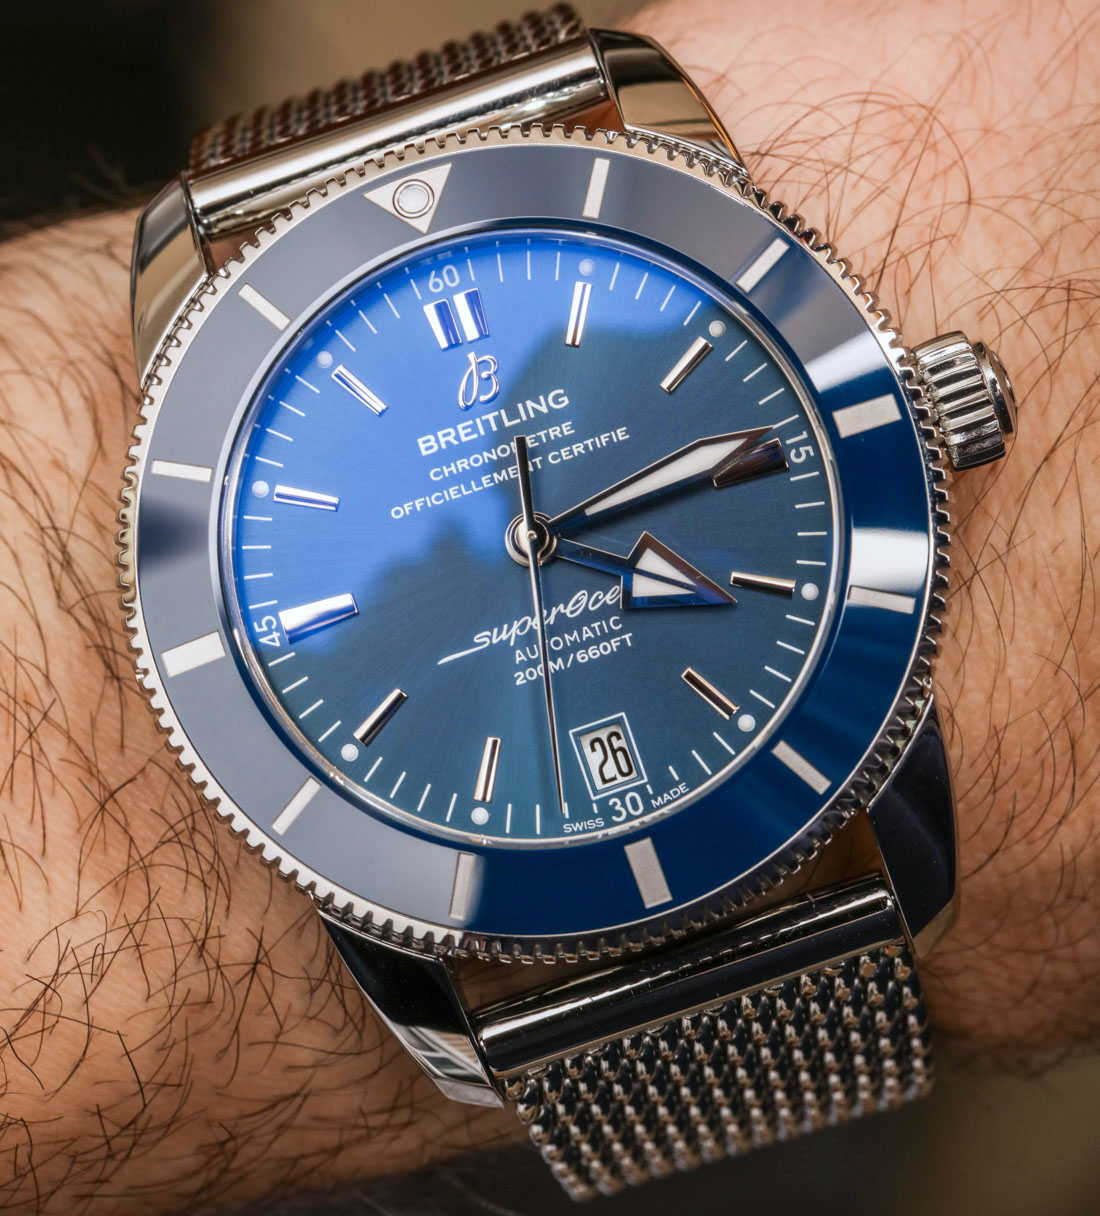 Breitling Superocean Heritage II B20 Automatic 42 Watch Review 